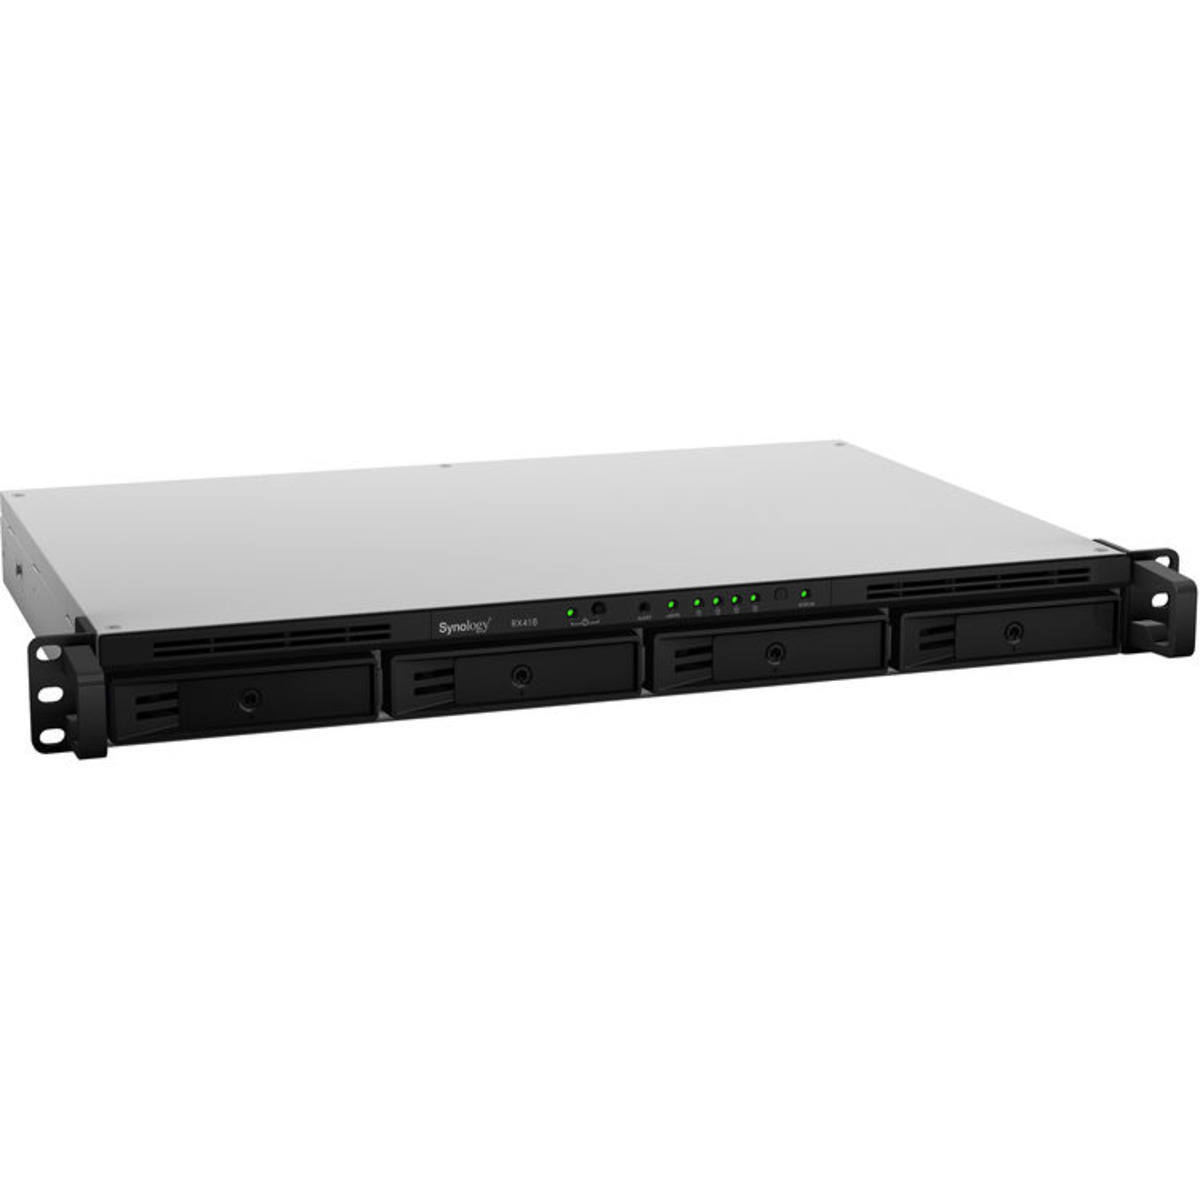 Synology RX418 External Expansion Drive 40tb 4-Bay RackMount Multimedia / Power User / Business Expansion Enclosure 2x20tb Western Digital Gold WD202KRYZ 3.5 7200rpm SATA 6Gb/s HDD ENTERPRISE Class Drives Installed - Burn-In Tested RX418 External Expansion Drive